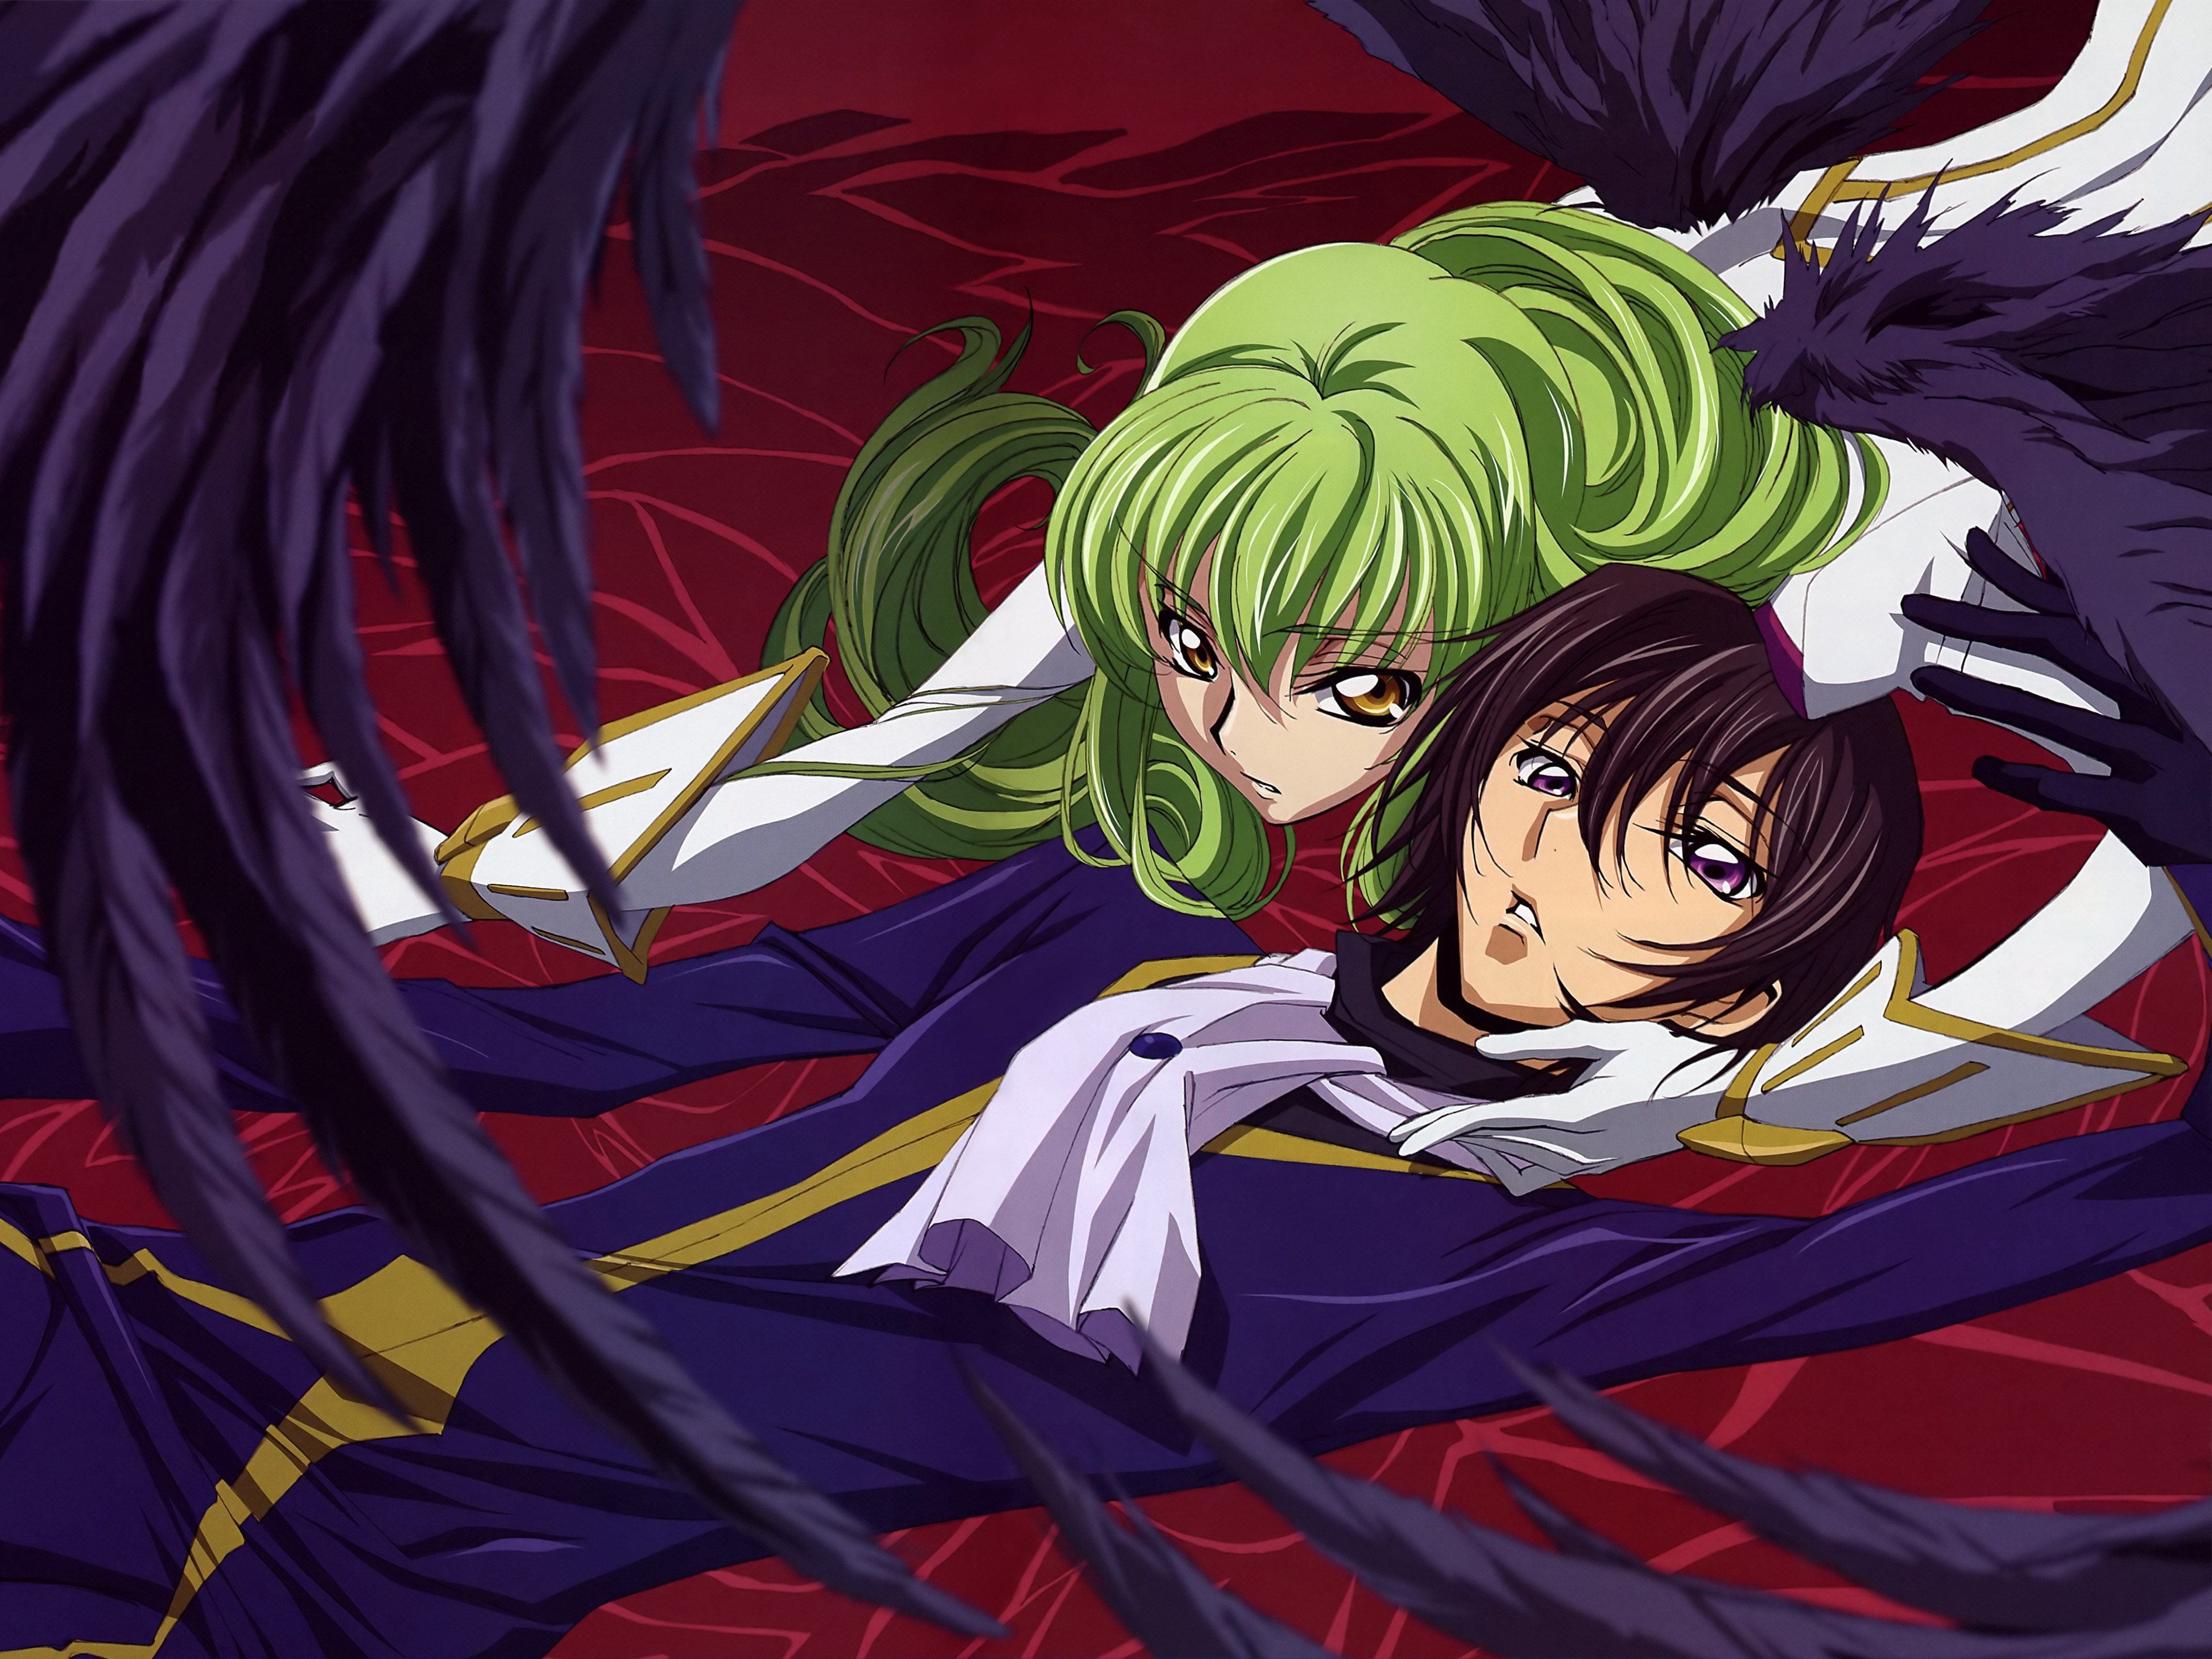 Lelouch Wallpapers - Top Free Lelouch Backgrounds - WallpaperAccess